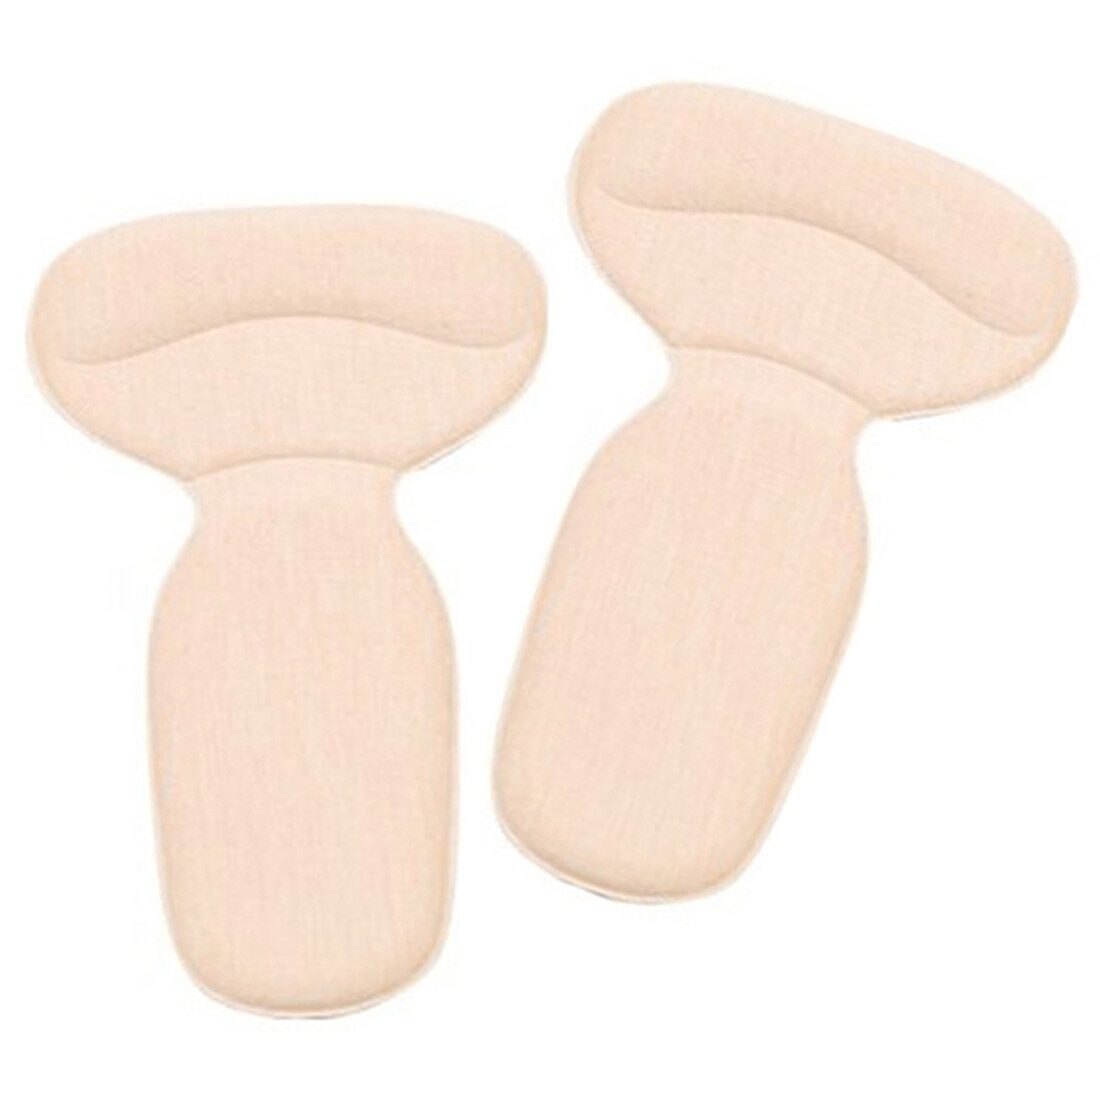 4 Pairs Heel Grips Extra Strong Heel Stickers Shoe Heel Snugs Inserts Insoles Pads Foot Care Protector Beige - ebowsos